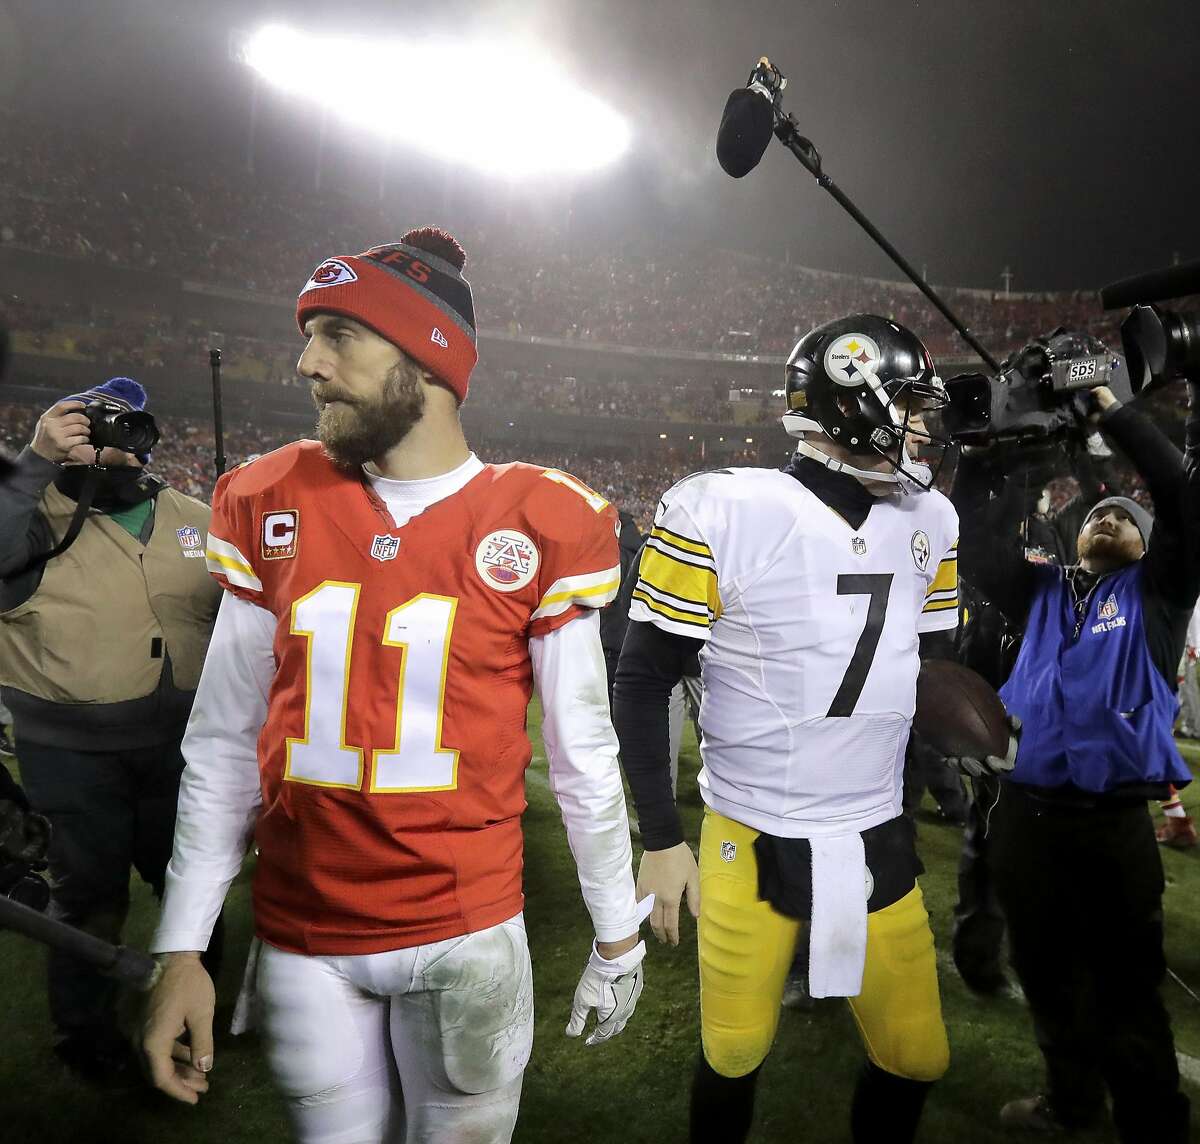 Kansas City Chiefs quarterback Alex Smith (11) walks off the field after talking with Pittsburgh Steelers quarterback Ben Roethlisberger (7) at the end of an NFL divisional playoff football game Sunday, Jan. 15, 2017, in Kansas City, Mo. The Steelers won 18-16. (AP Photo/Charlie Riedel)